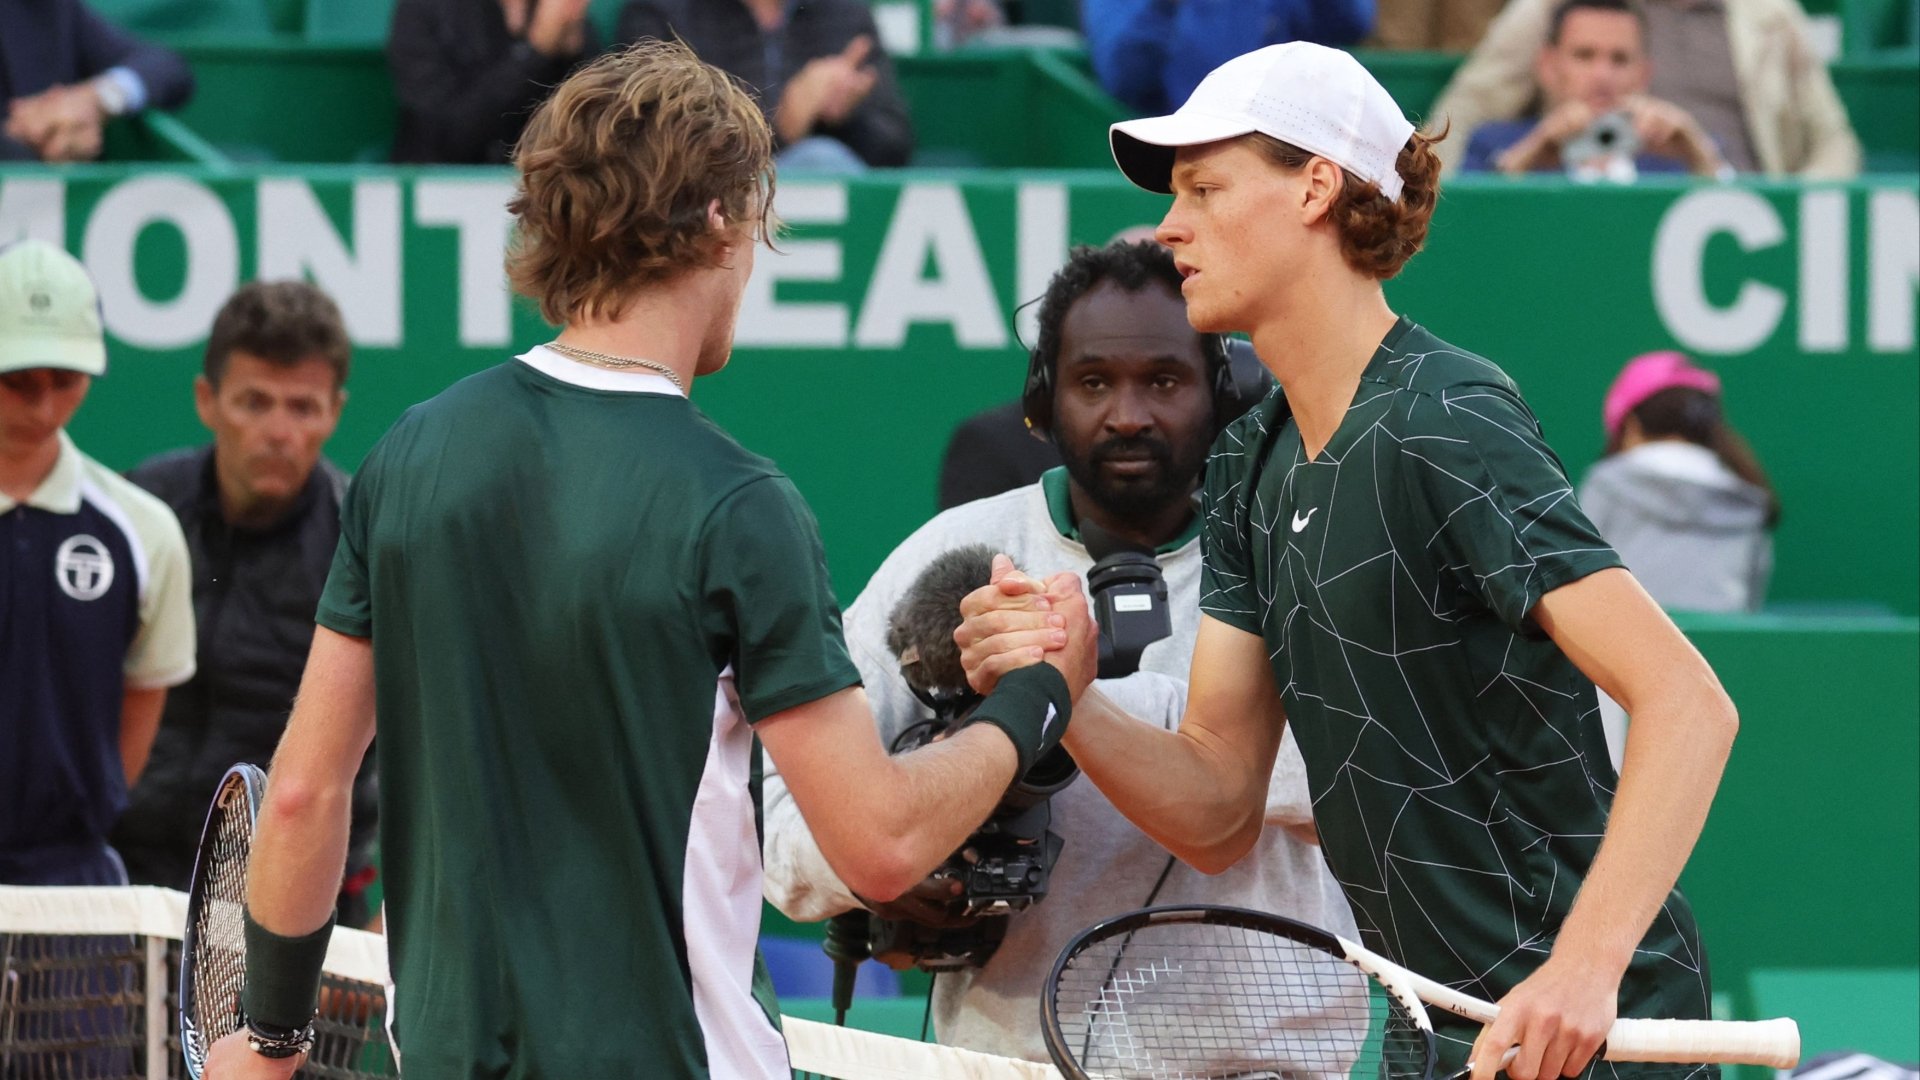 Vienna 2023: Jannik Sinner vs Andrey Rublev preview, head-to-head,  prediction, odds, and pick